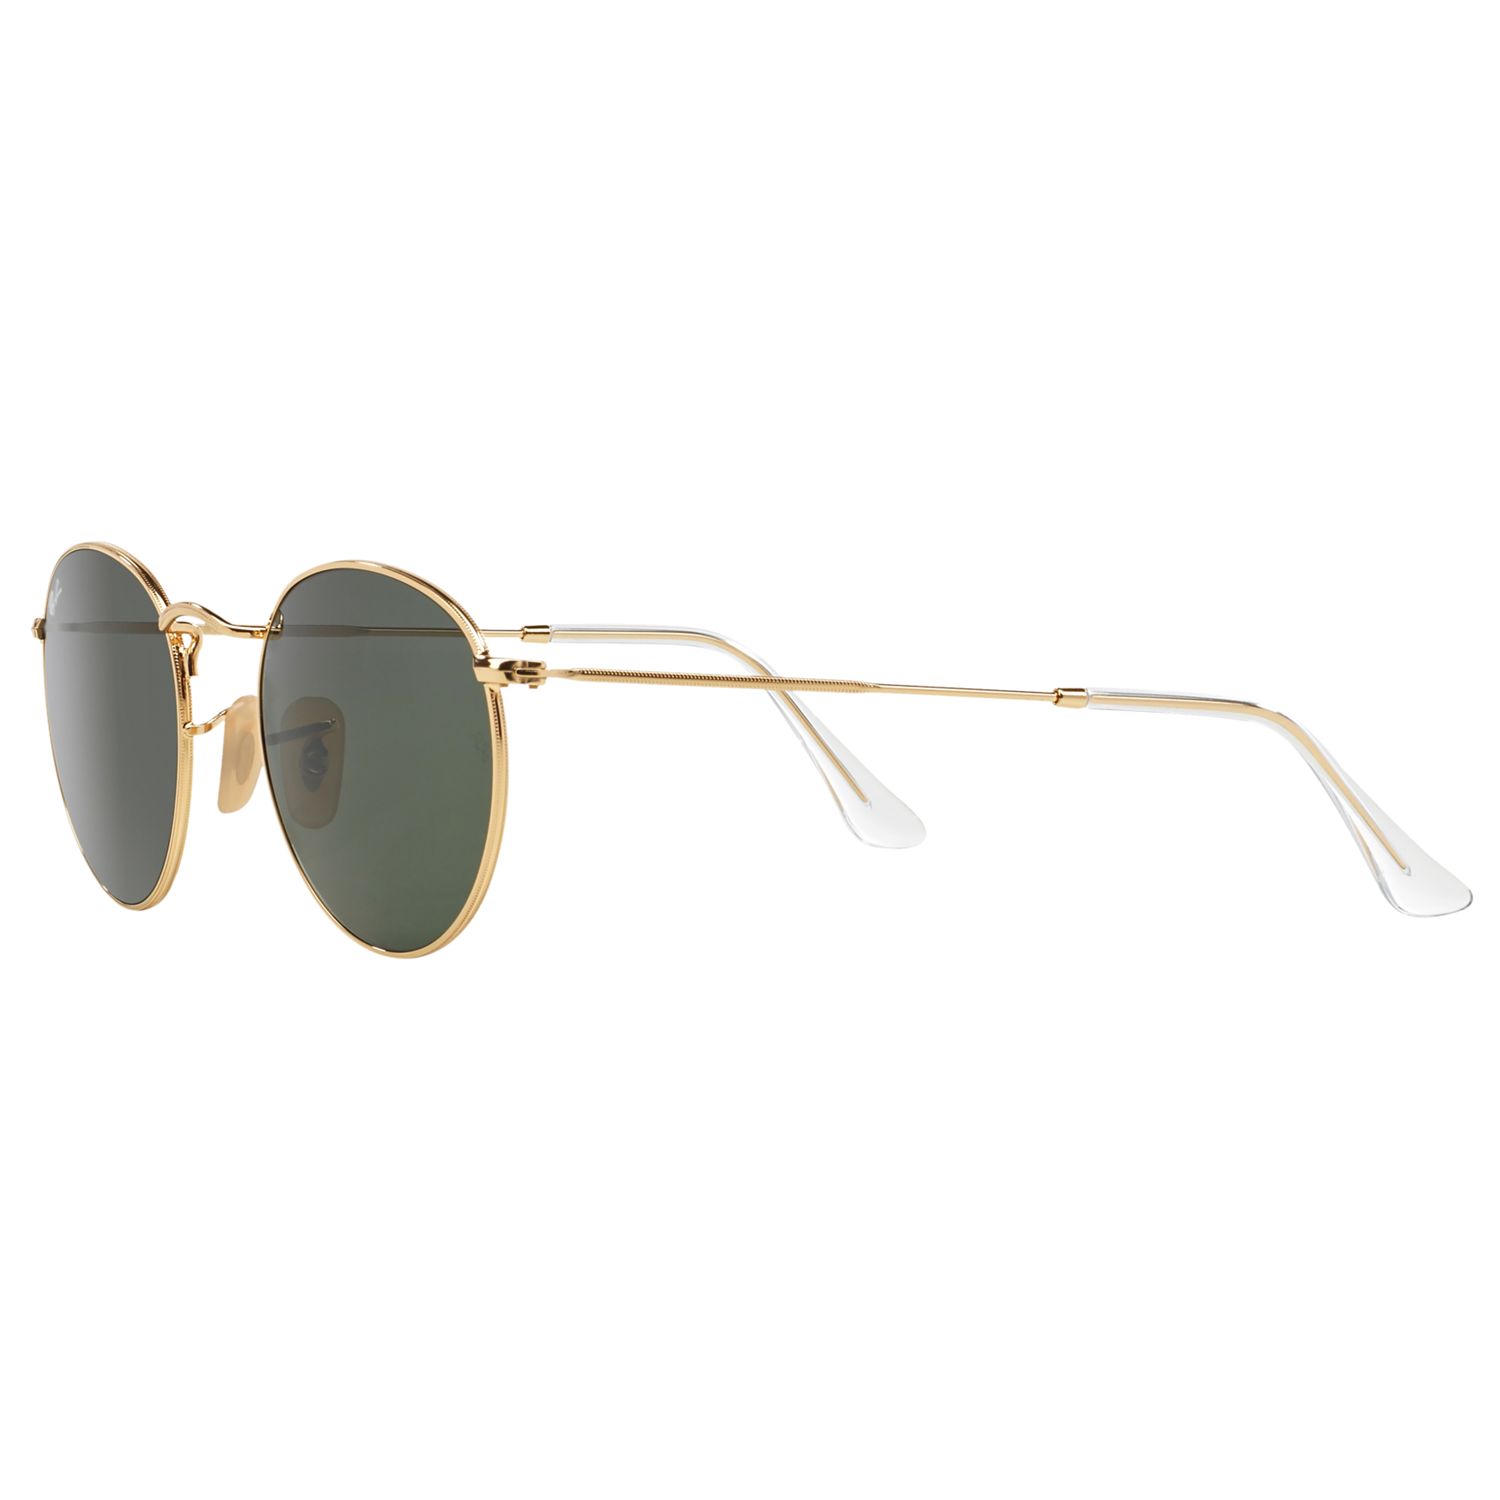 Ray-Ban RB3447 Round Metal Sunglasses, Gold/Green at John Lewis & Partners